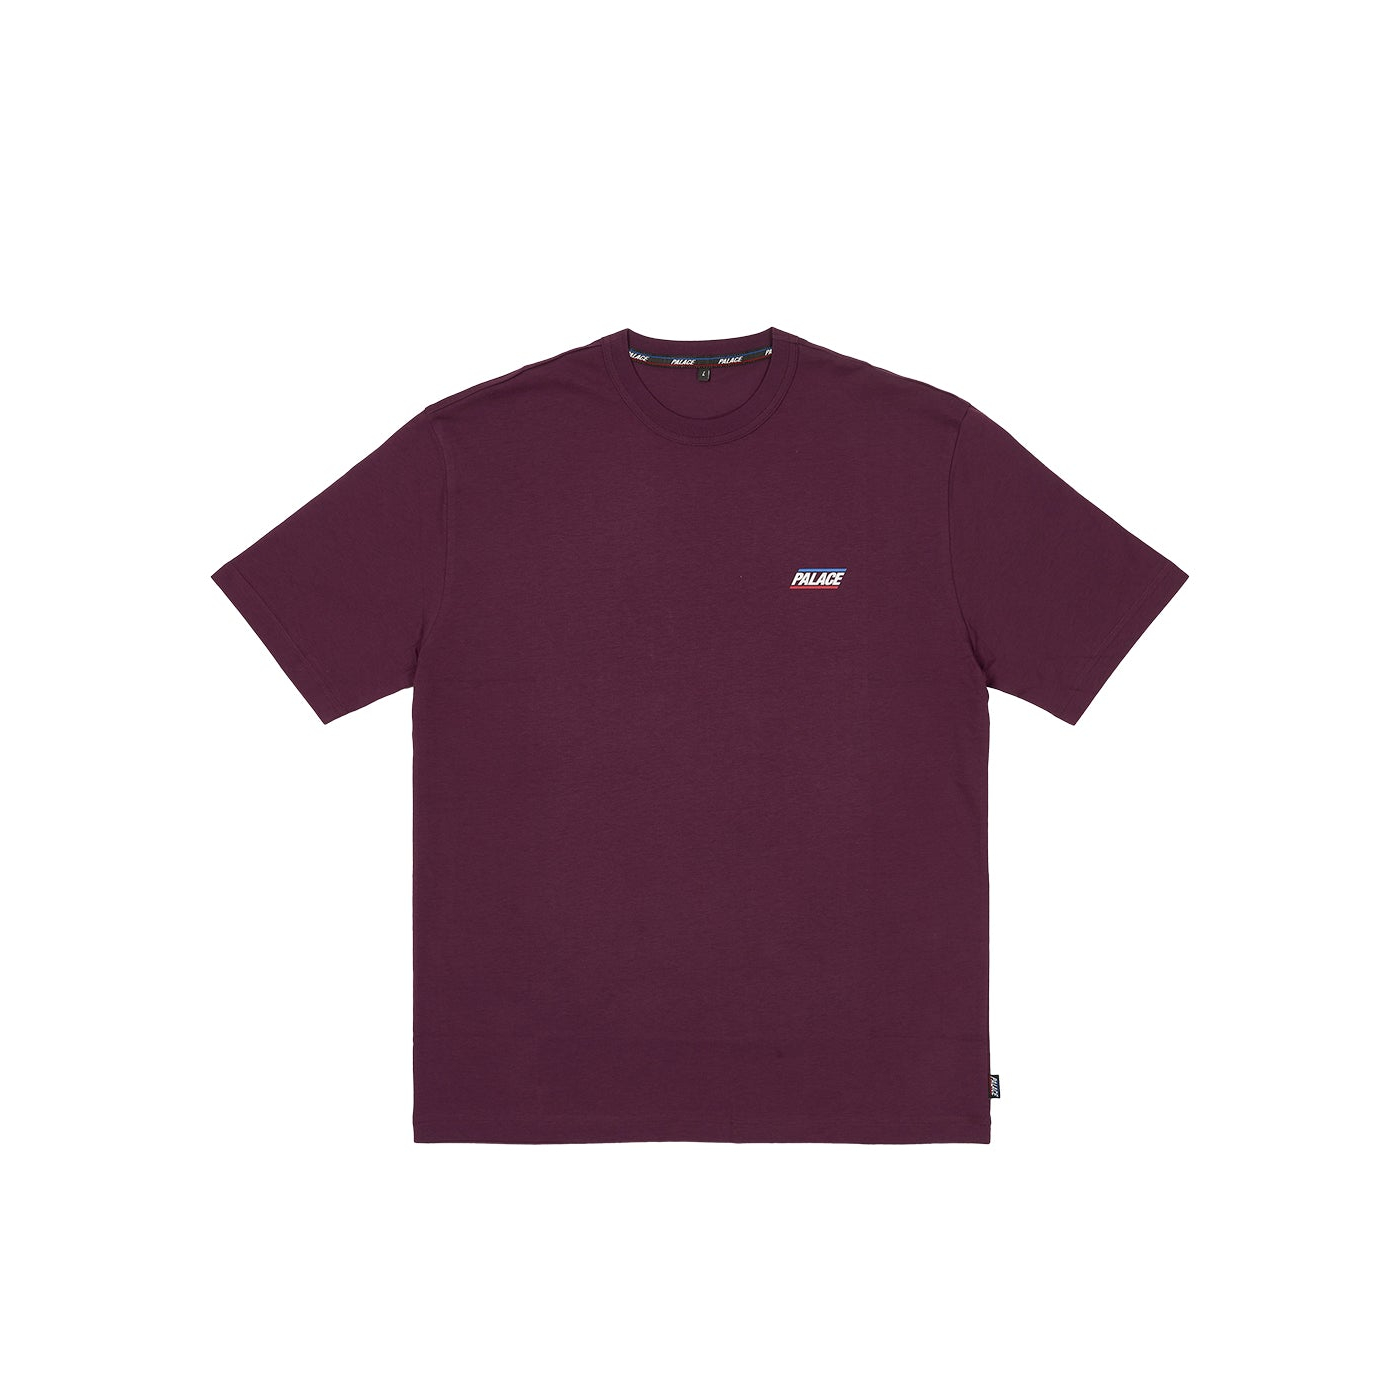 Thumbnail BASICALLY A T-SHIRT RED WINE one color